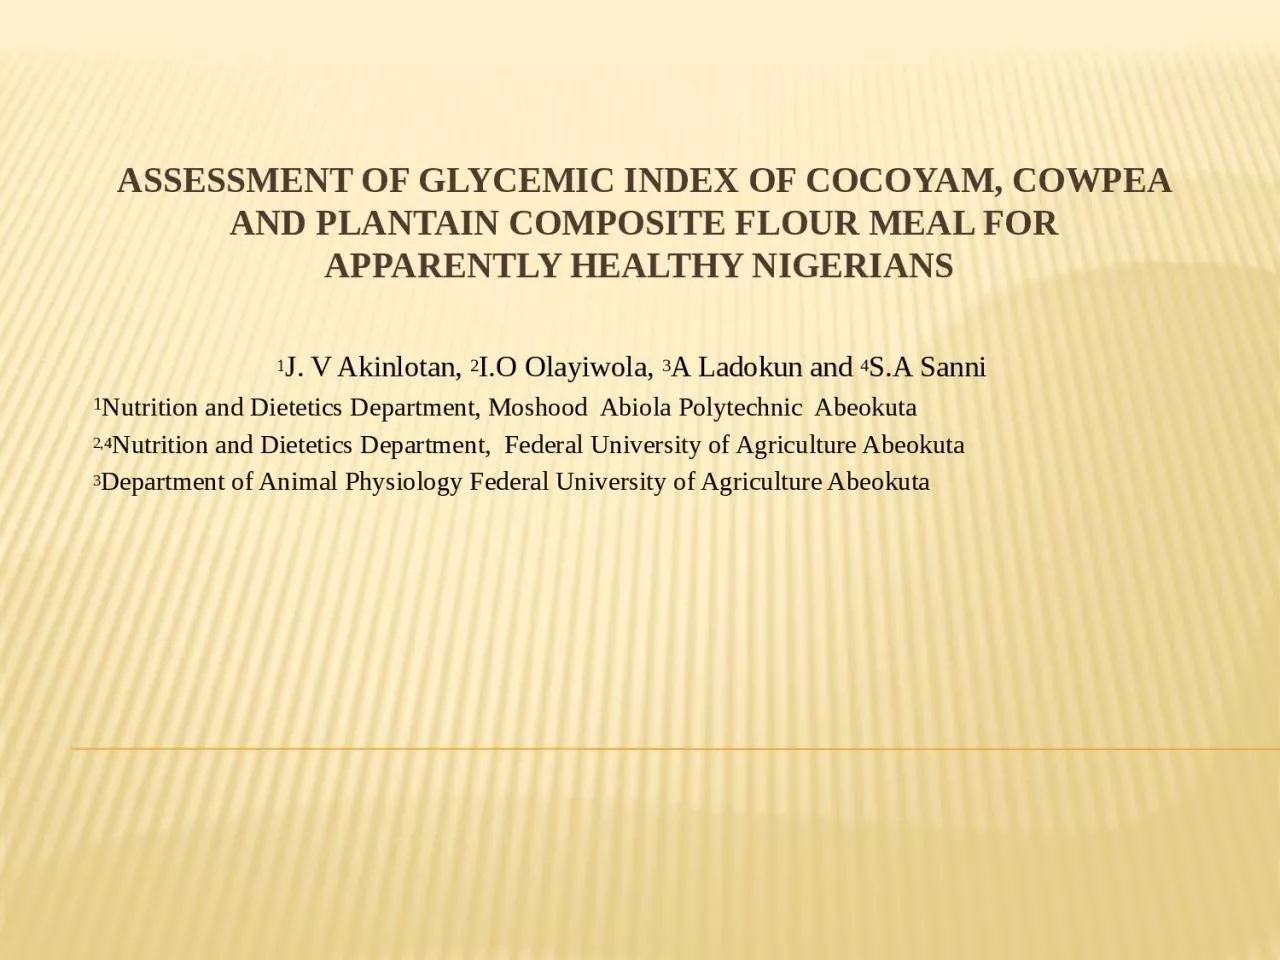 ASSESSMENT OF GLYCEMIC INDEX OF COCOYAM, COWPEA AND PLANTAIN COMPOSITE FLOUR MEAL FOR